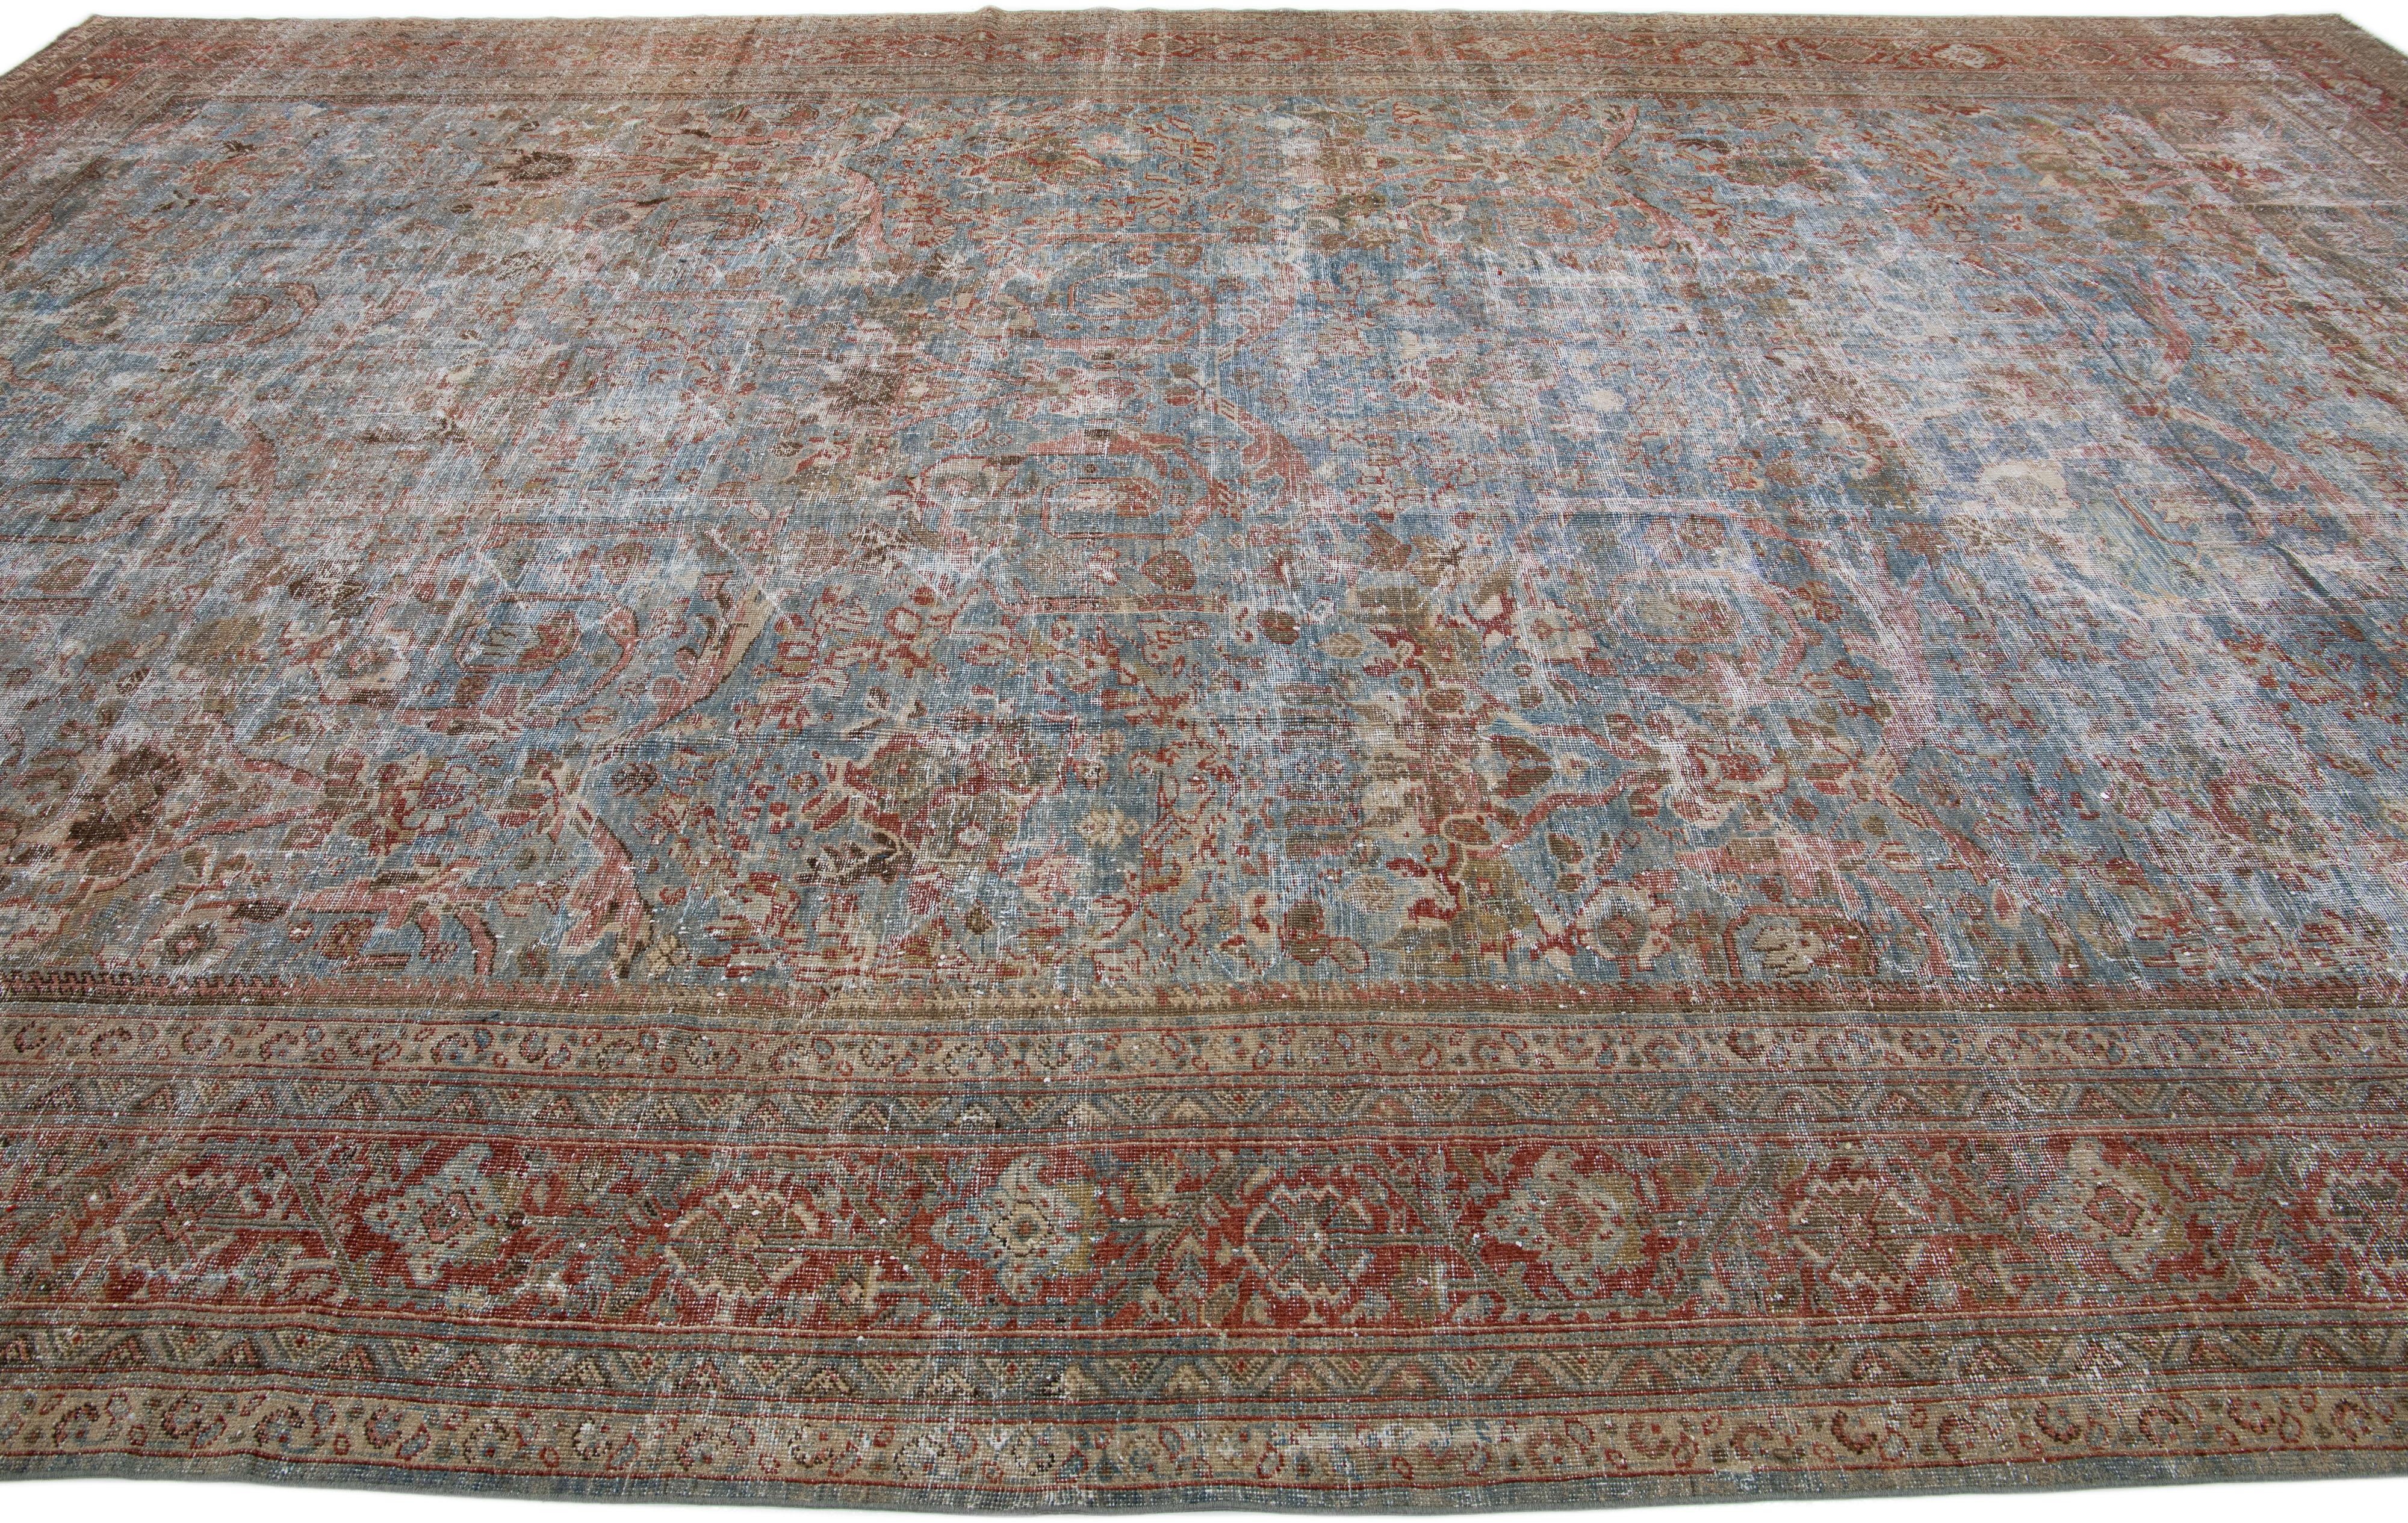 Blue 1900s Handmade Antique Persian Mahal Wool Rug With Allover Design In Distressed Condition For Sale In Norwalk, CT